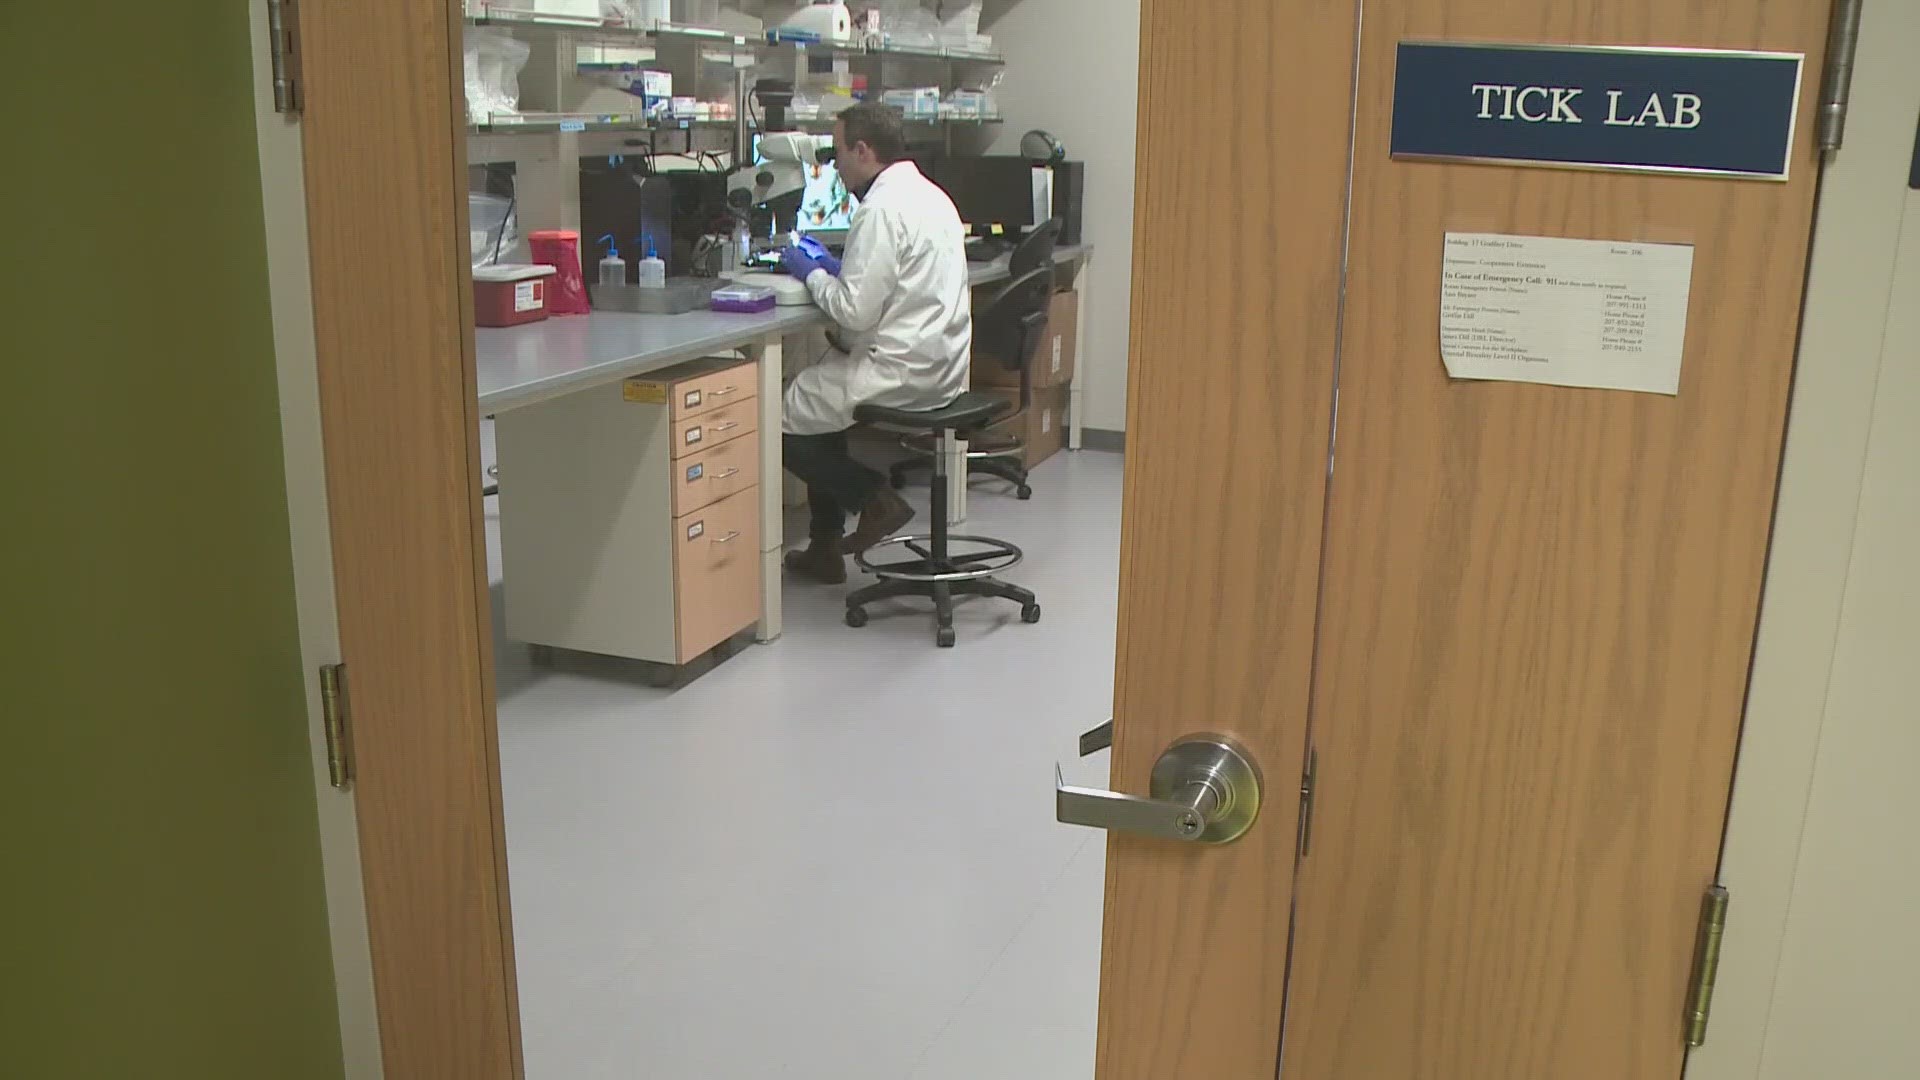 Experts at the UMaine Tick Lab say the recent storm made a small dent in tick activity, but it won't slow down their expansion into new areas of the state.